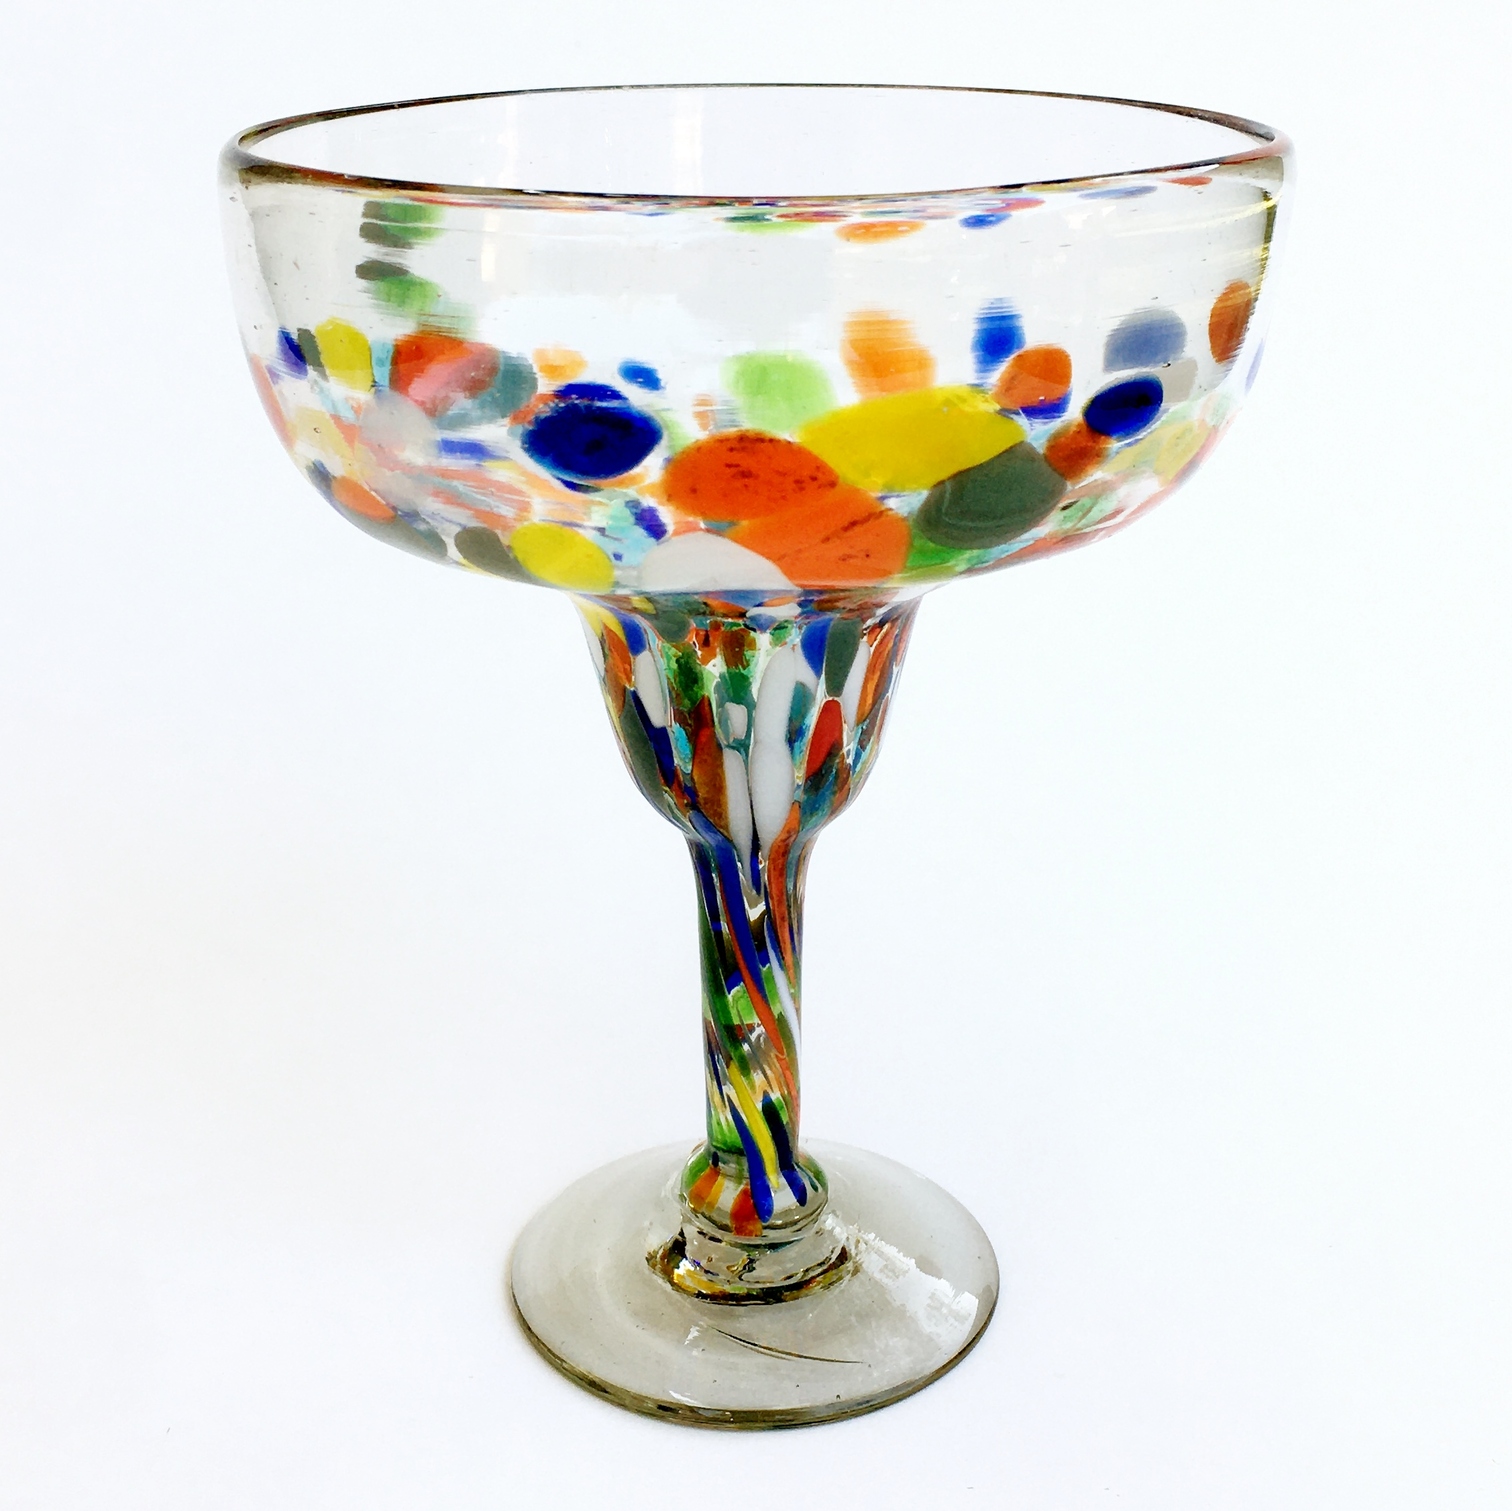 https://mexhandcraft.com/imgProducts/Clear%20&%20Confetti%20Large%20Margarita%20Glasses%20(1).jpg